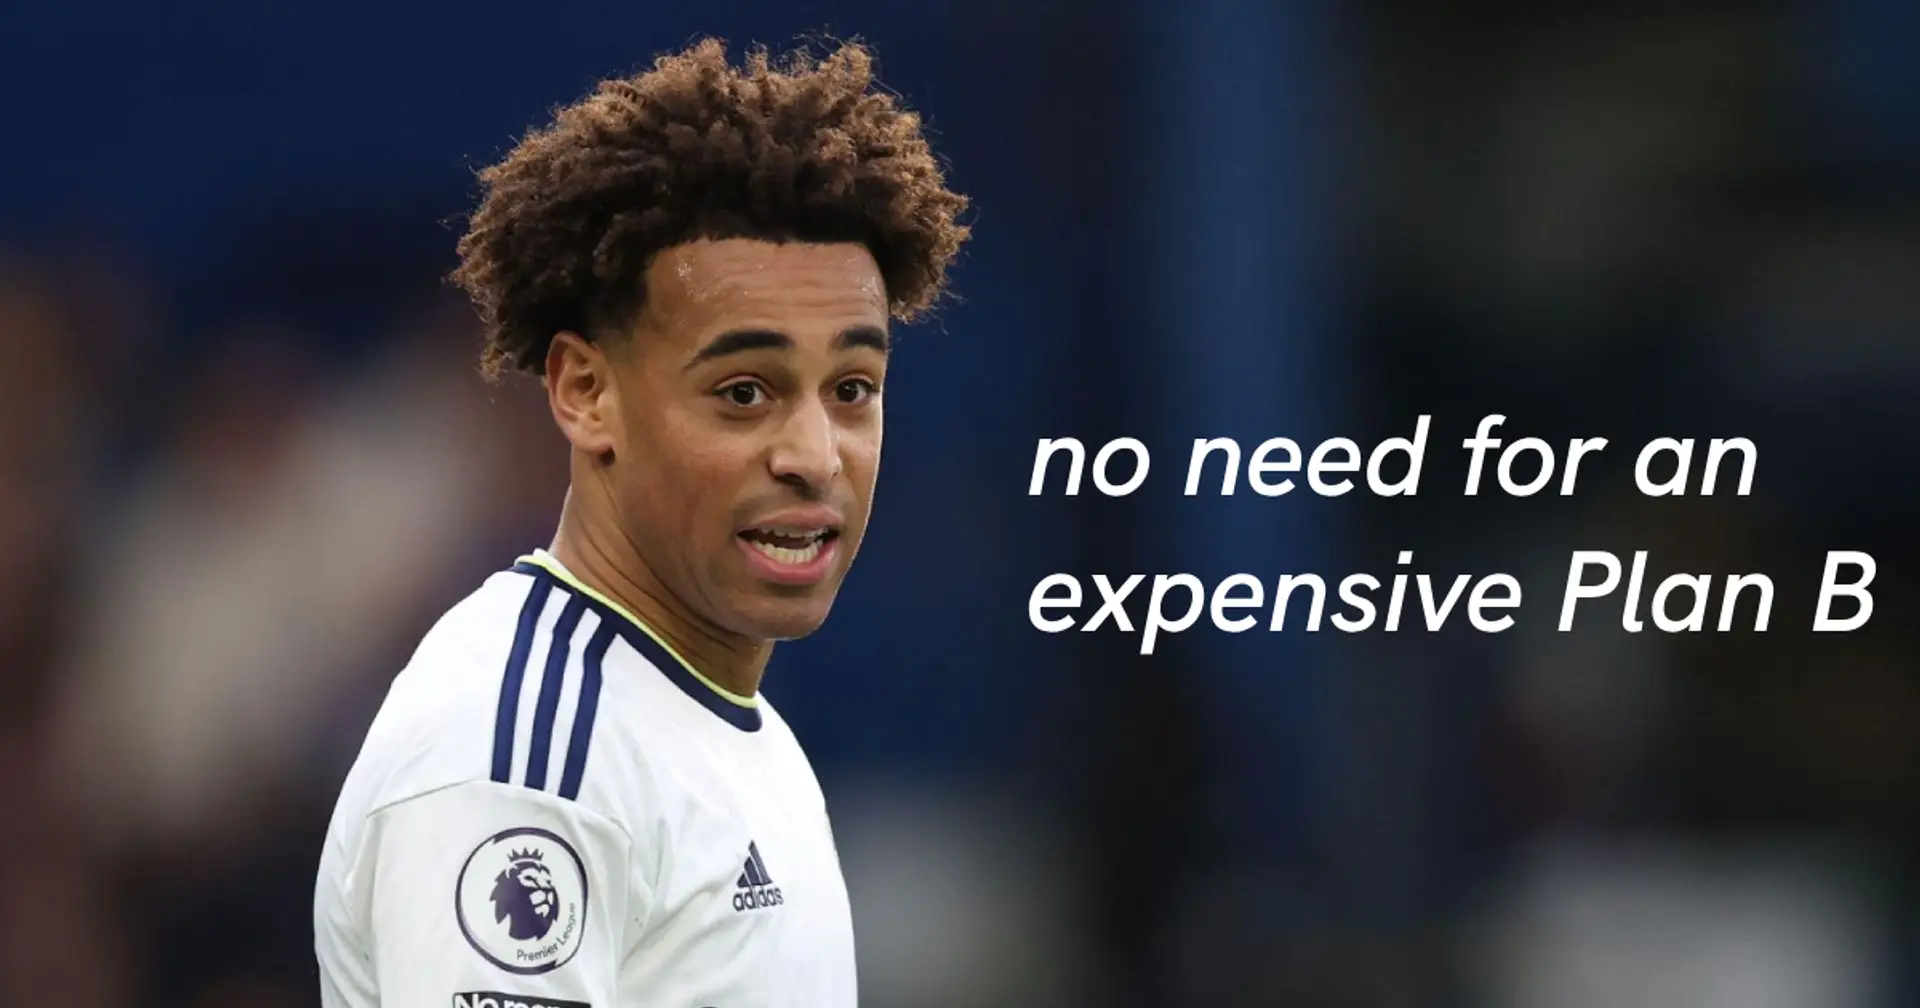 'Price tags don't always mean quality': fan makes case for Tyler Adams signing - but only on one condition